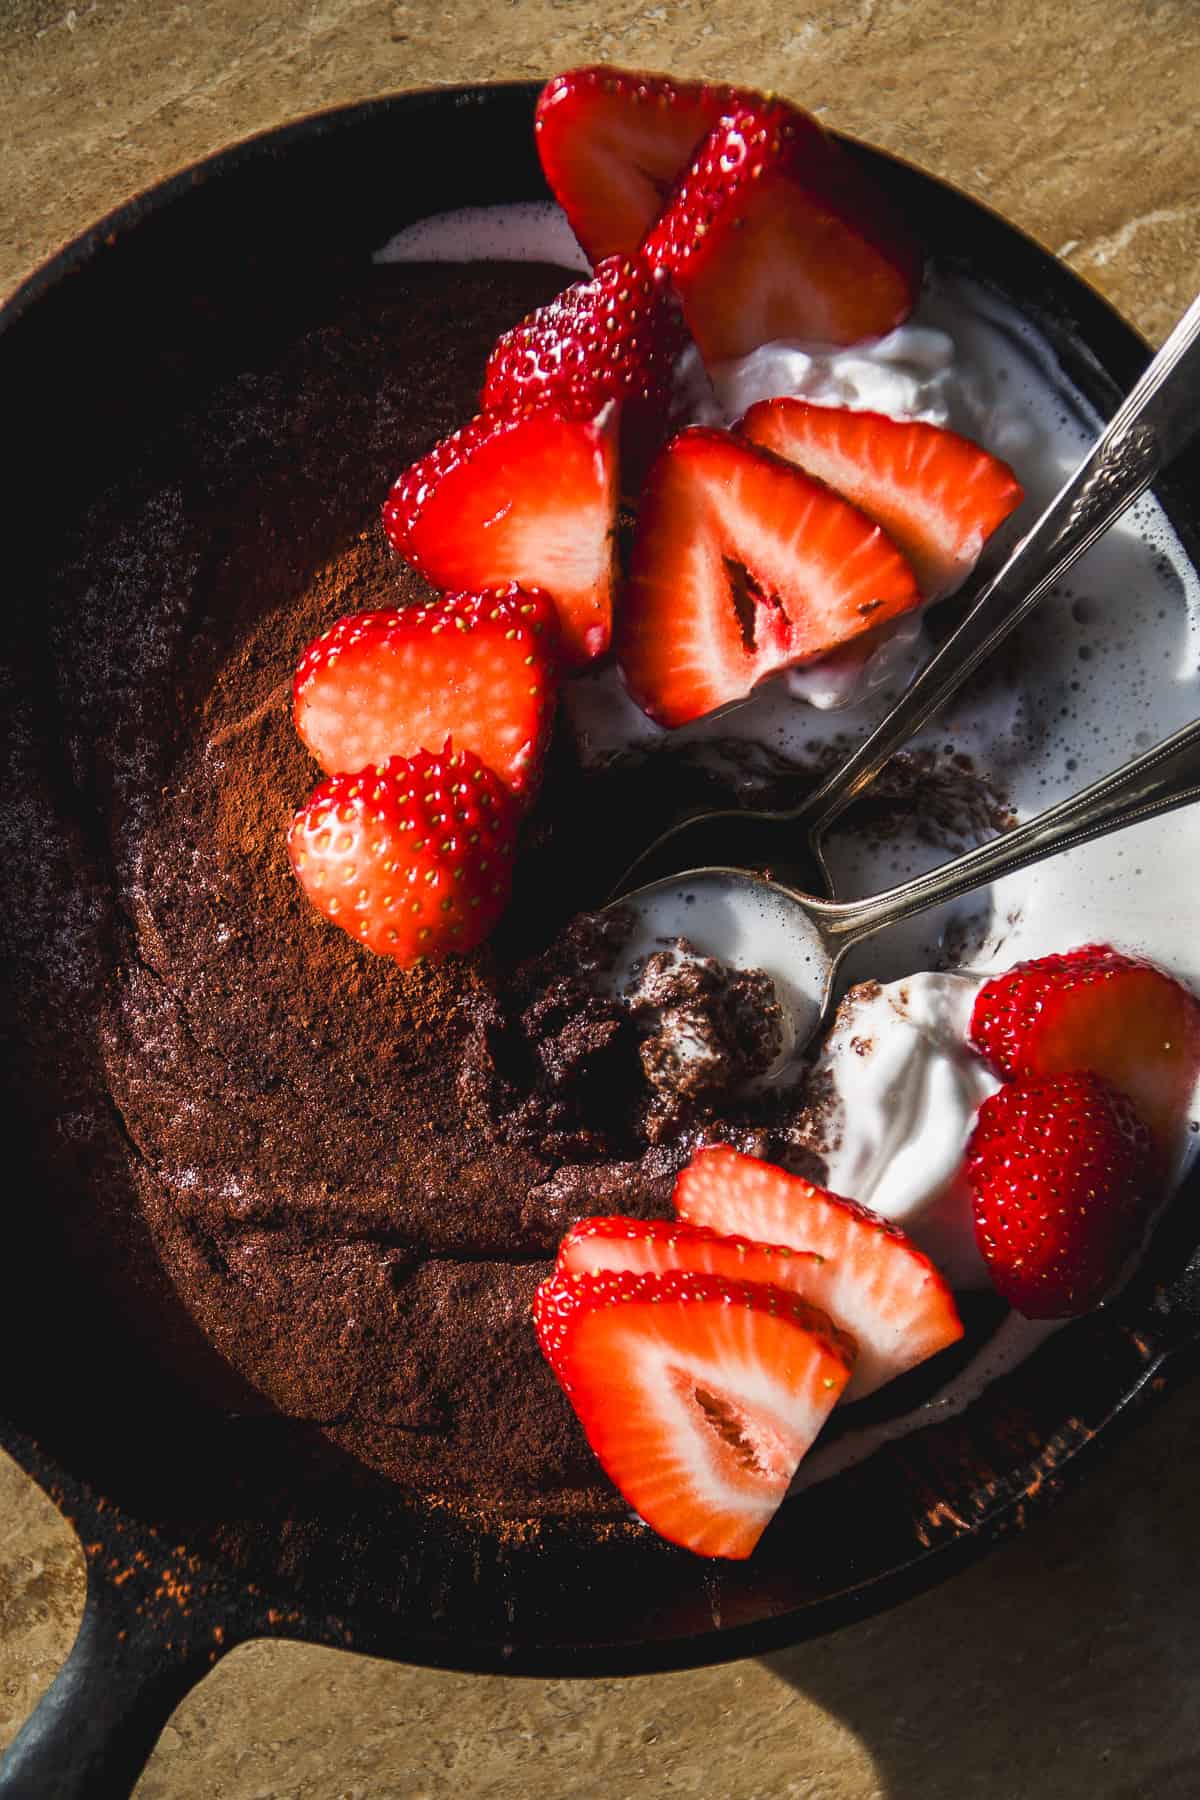 Overhead view of chocolate cast iron skillet cake with strawberries.